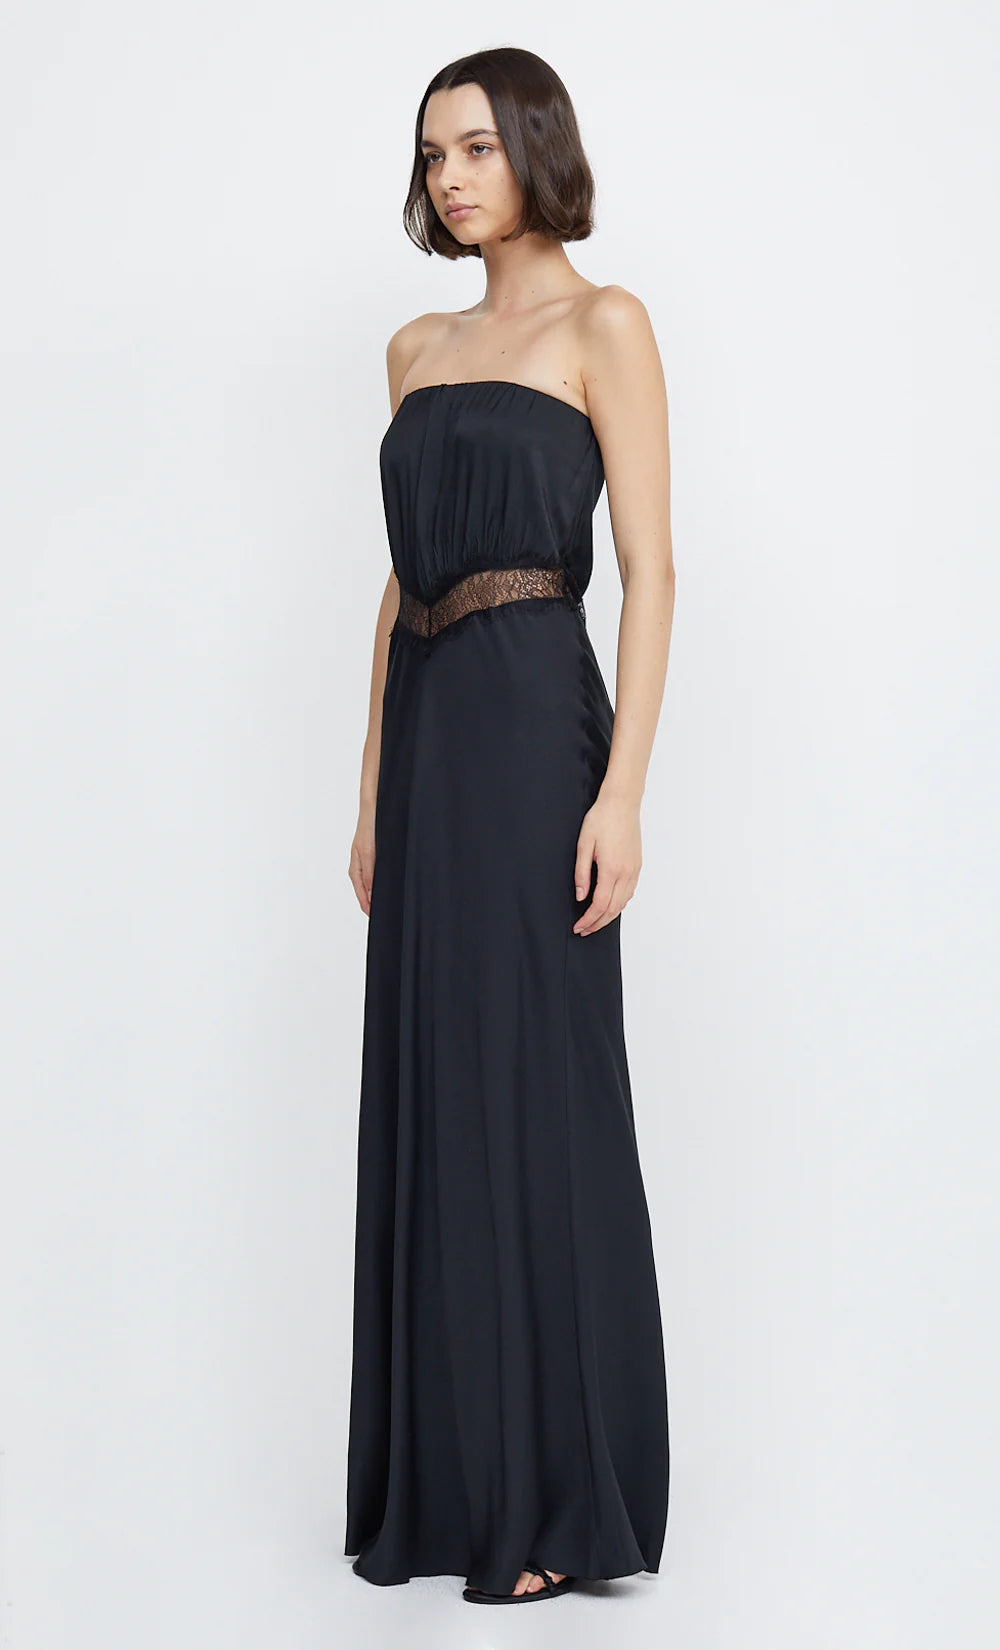 Spencer Lace Maxi Dress